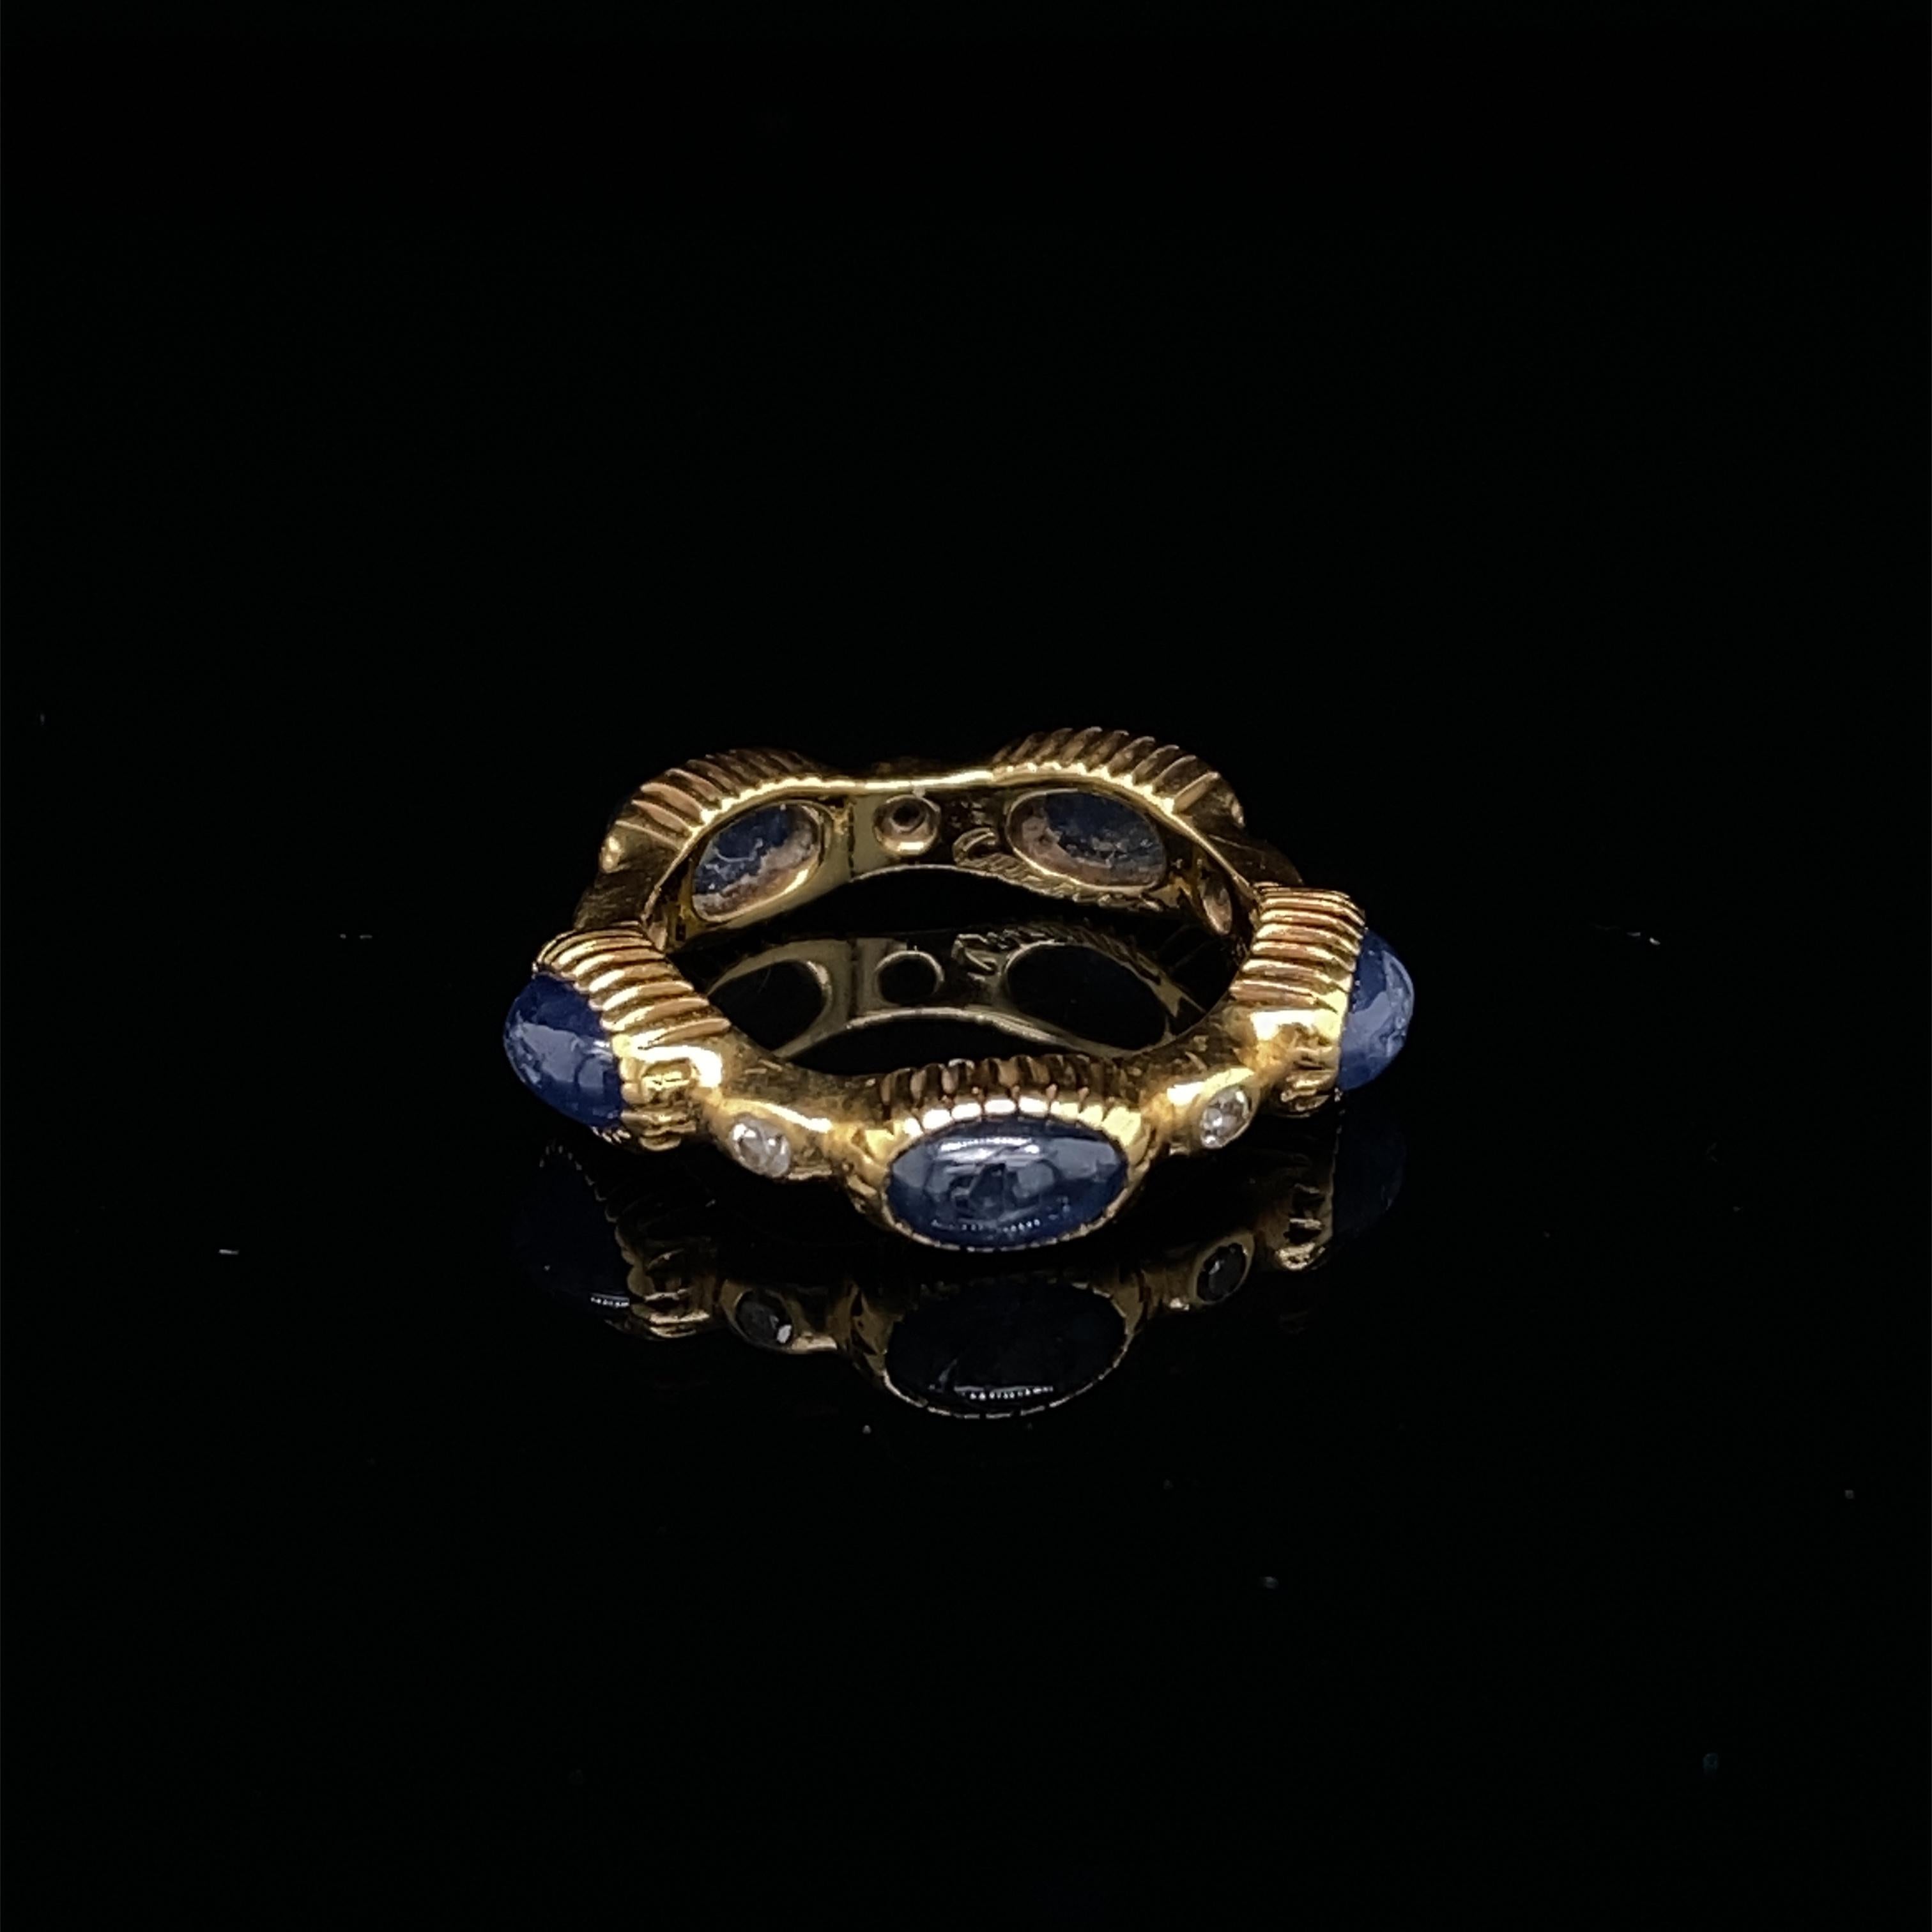 A Cartier sapphire diamond full eternity ring in 18 karat yellow gold, circa 1960.

This stylish retro Cartier ring is full set with alternating vibrant blue sapphire cabochon and round brilliant cut diamonds.
 
When viewed from the side the ring